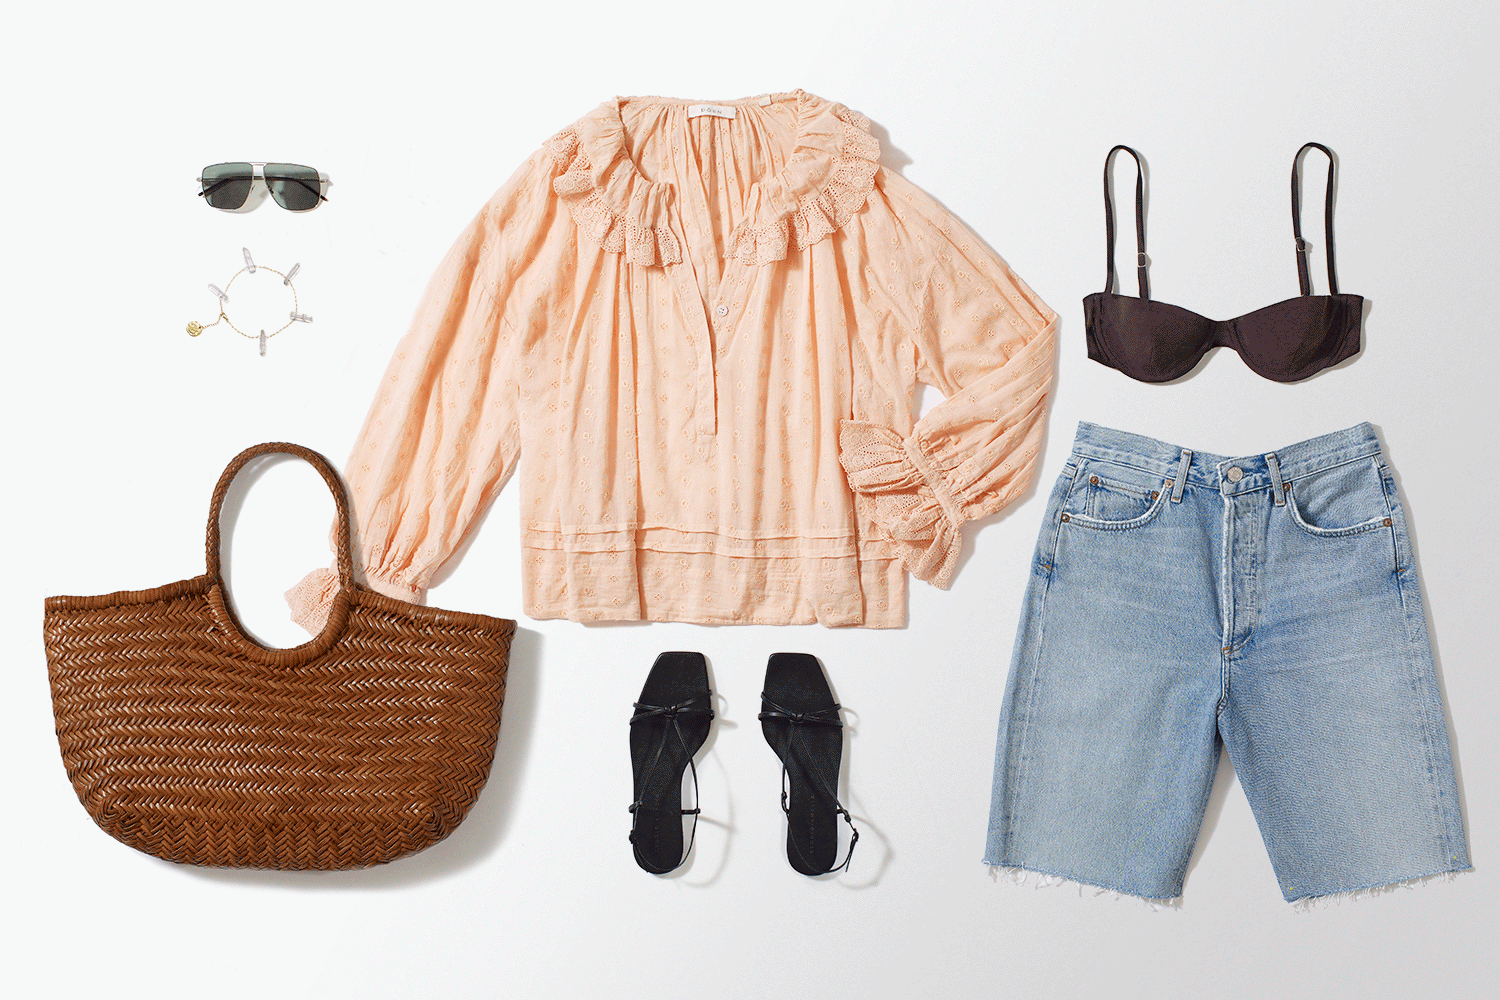 The look: a breezy summer blouse